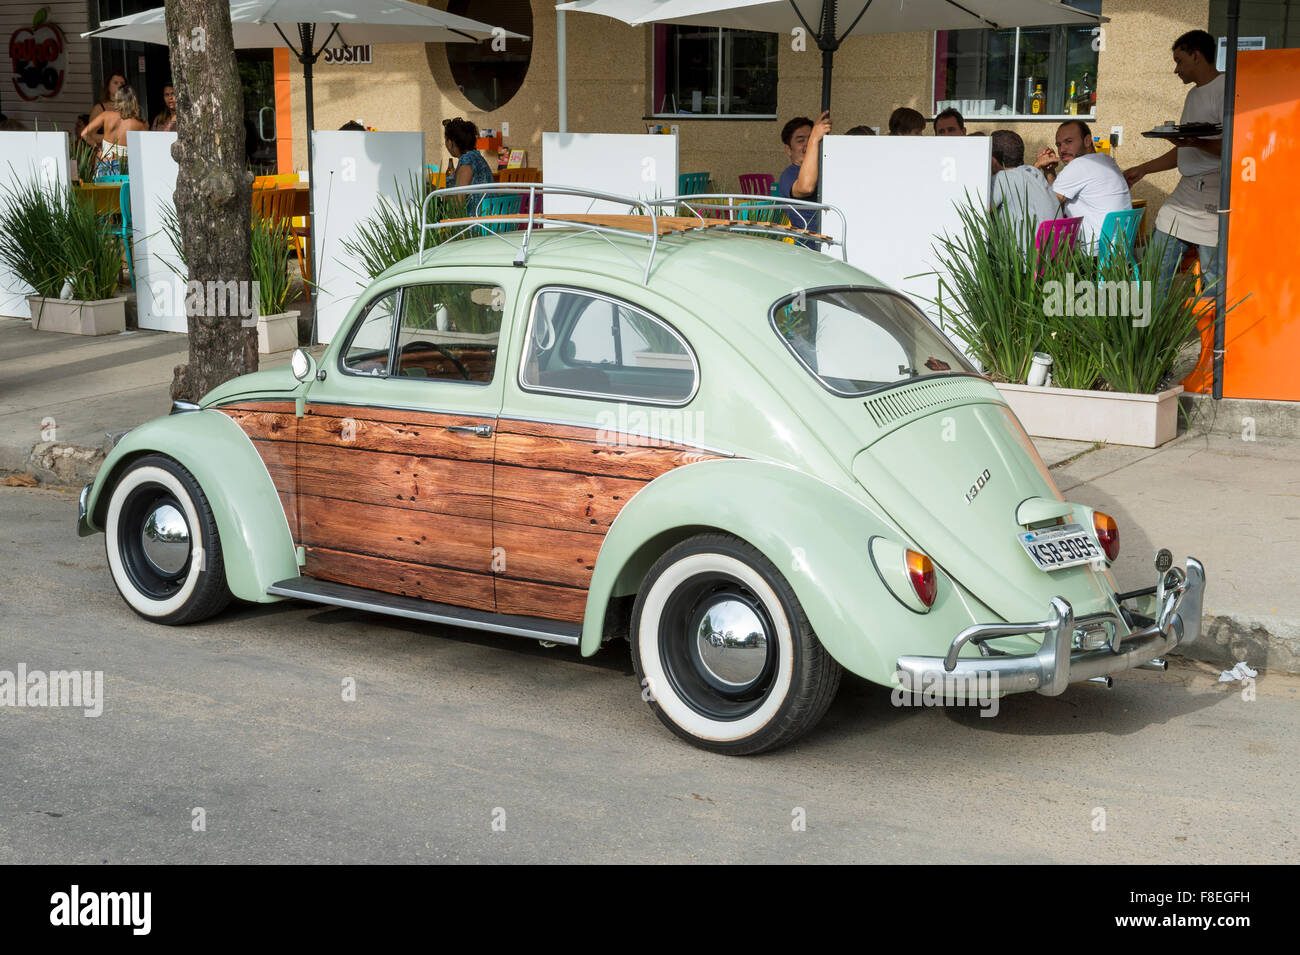 RIO DE JANEIRO, BRAZIL - NOVEMBER 1, 2015: Old Volkswagen Type 1 Beetle, known locally as a Fusca, parked on the street. Stock Photo